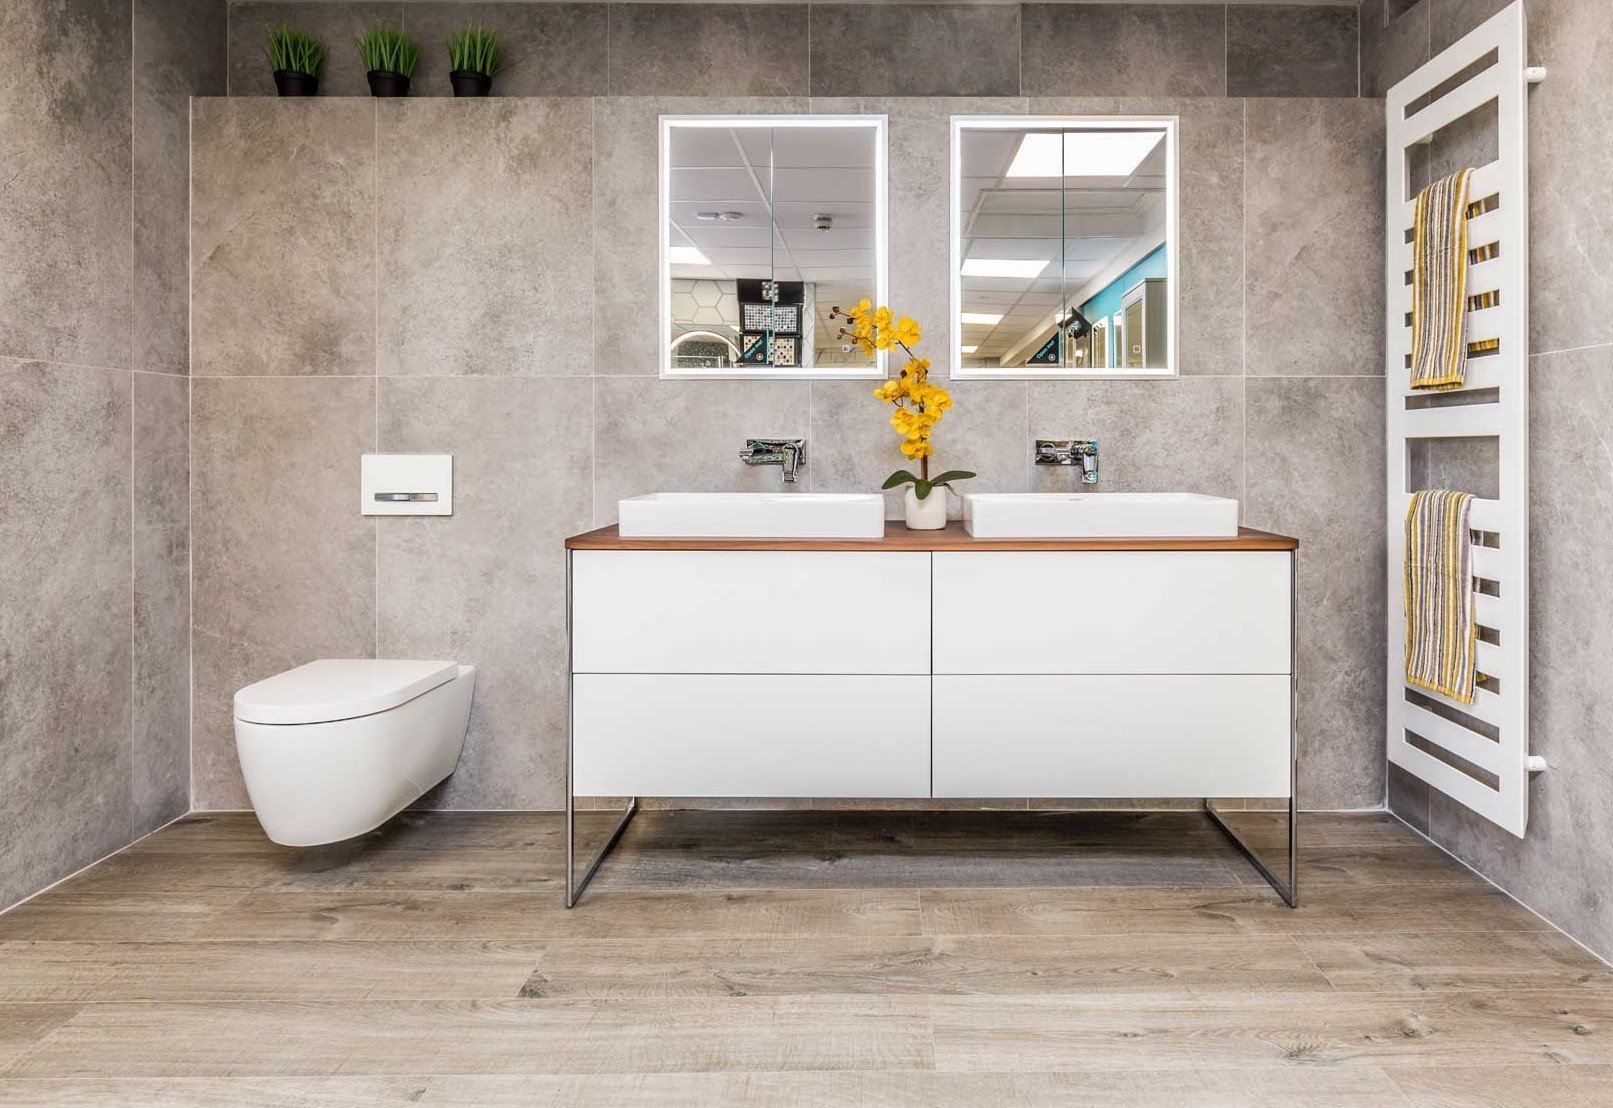 Bathroom Design Ideas - Come into a Turnbull showroom and be inspired